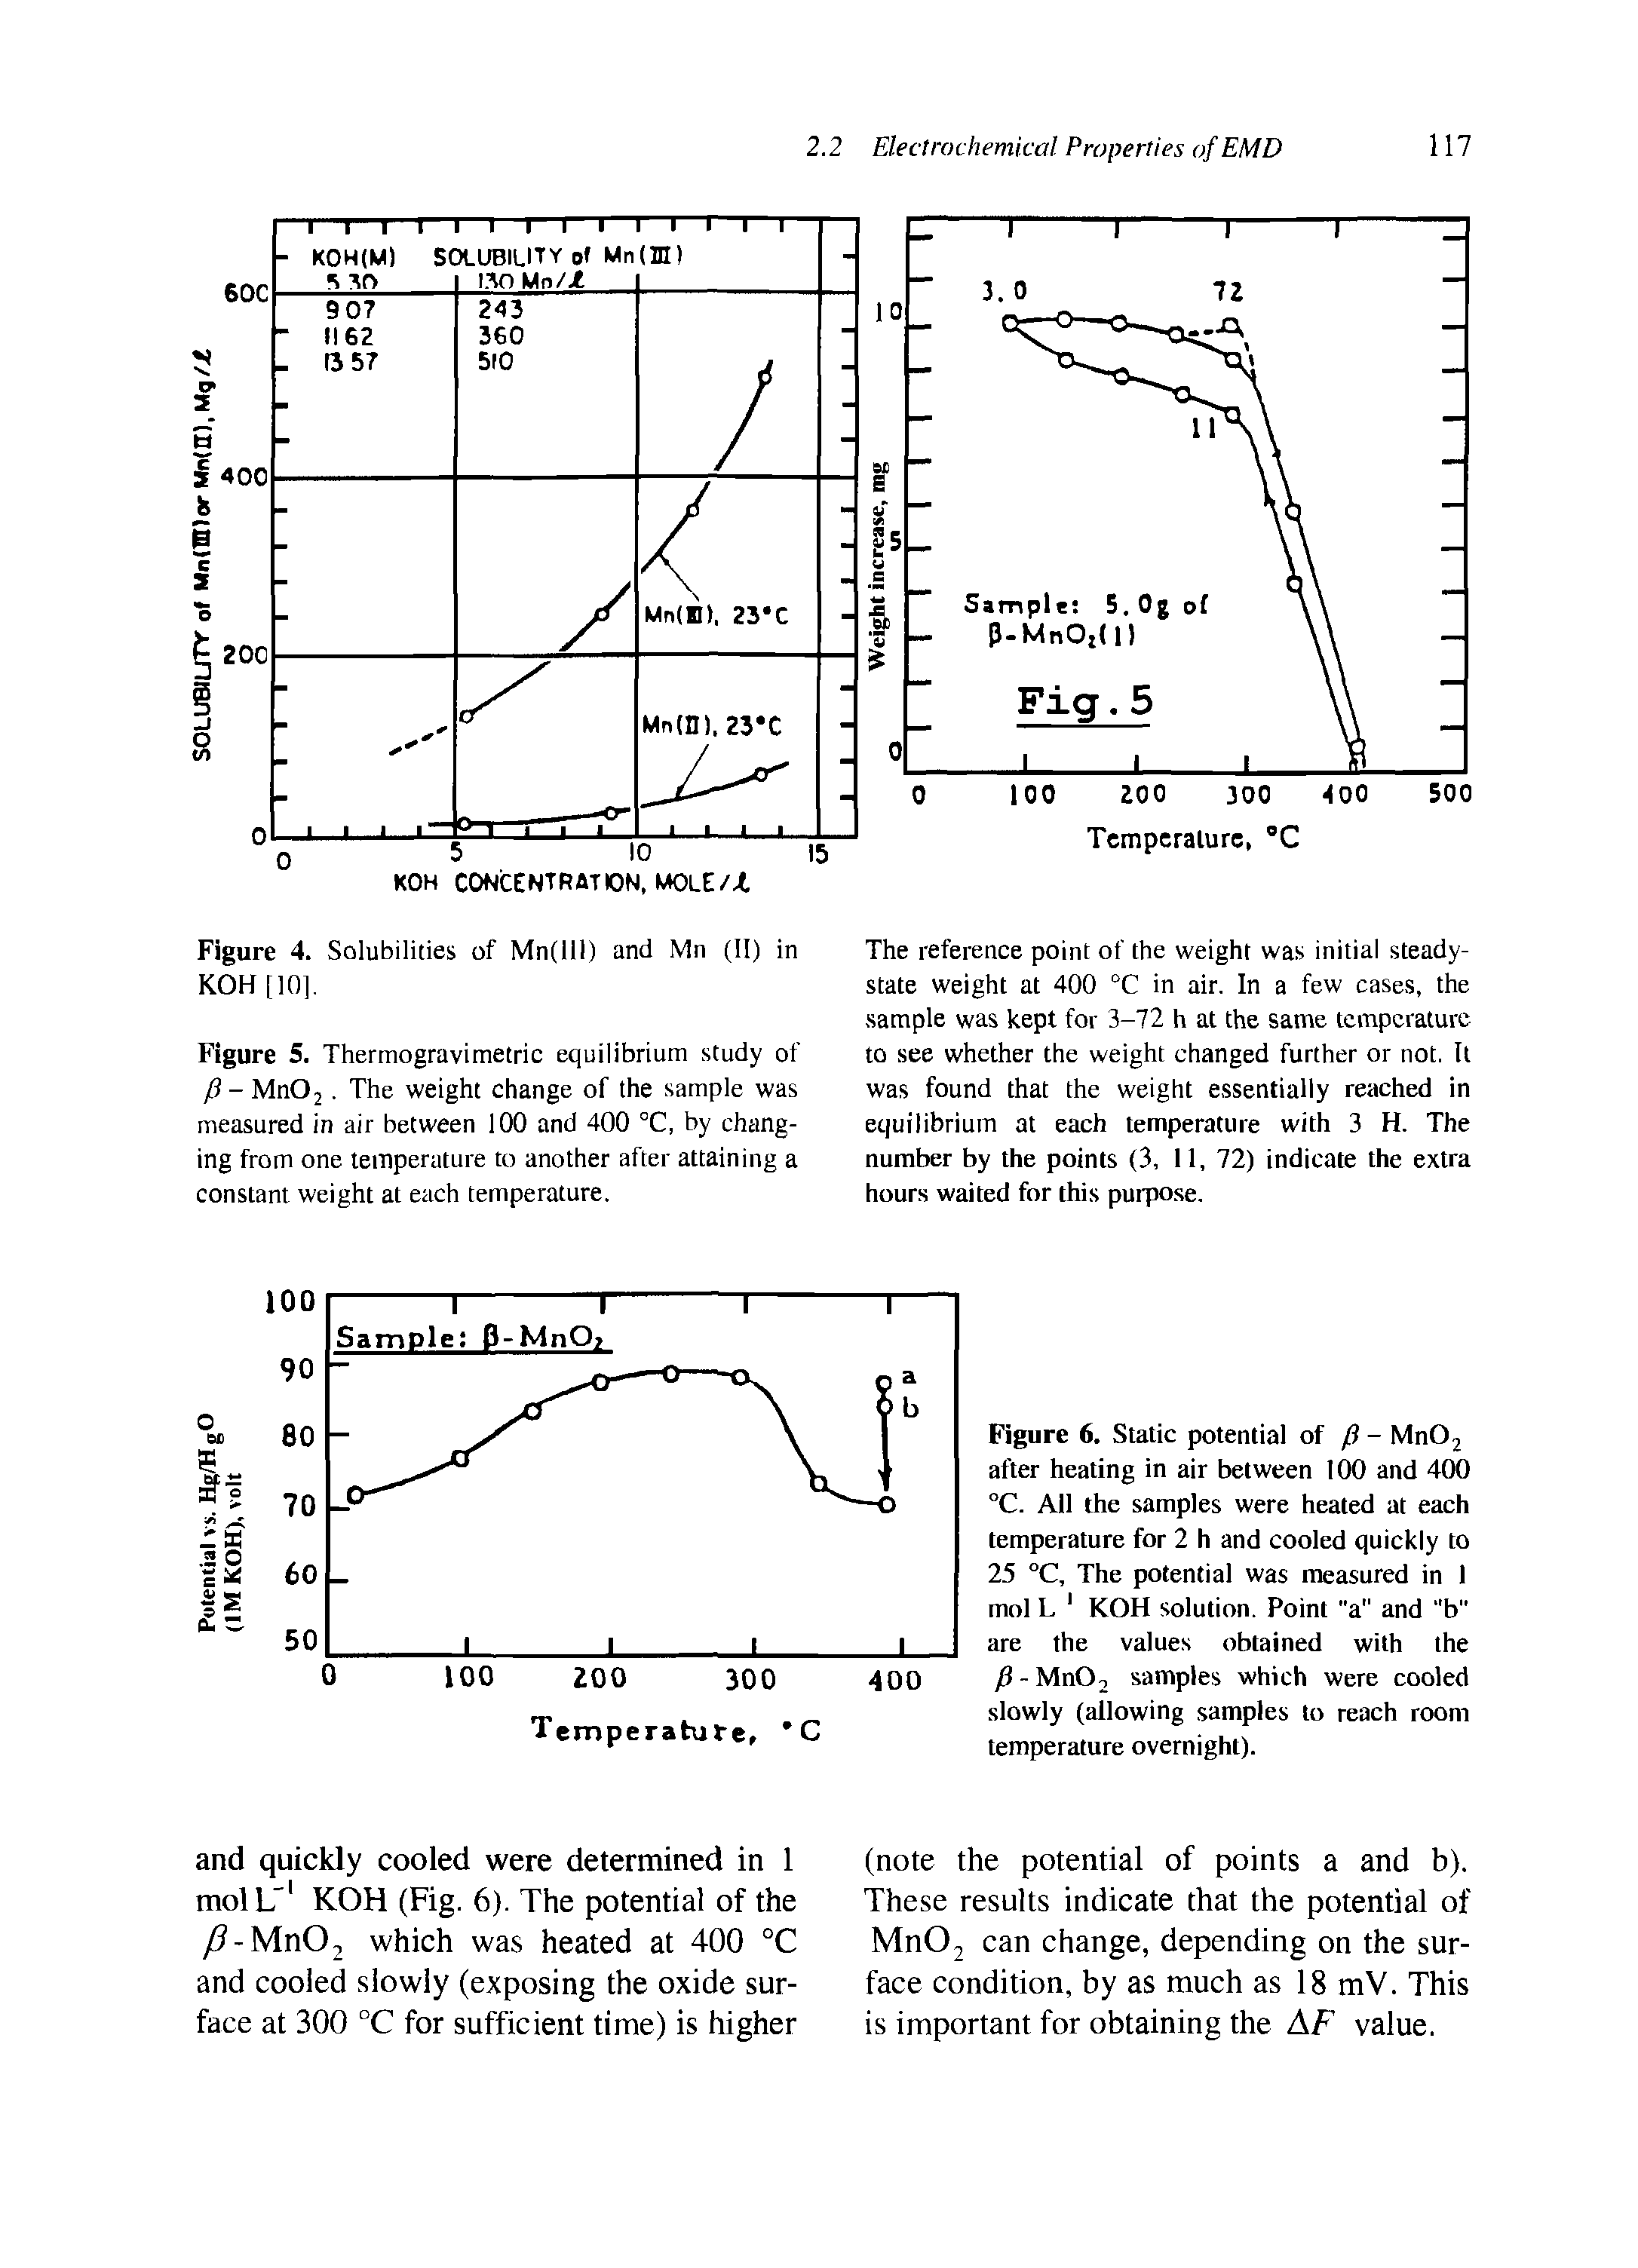 Figure 6. Static potential of / - Mn02 after heating in air between 100 and 400 °C. All the samples were heated at each temperature for 2 h and cooled quickly to 25 °C, The potential was measured in 1 mol L 1 KOH solution. Point "a" and b" are the values obtained with the P - Mn02 samples which were cooled slowly (allowing samples to reach room temperature overnight).